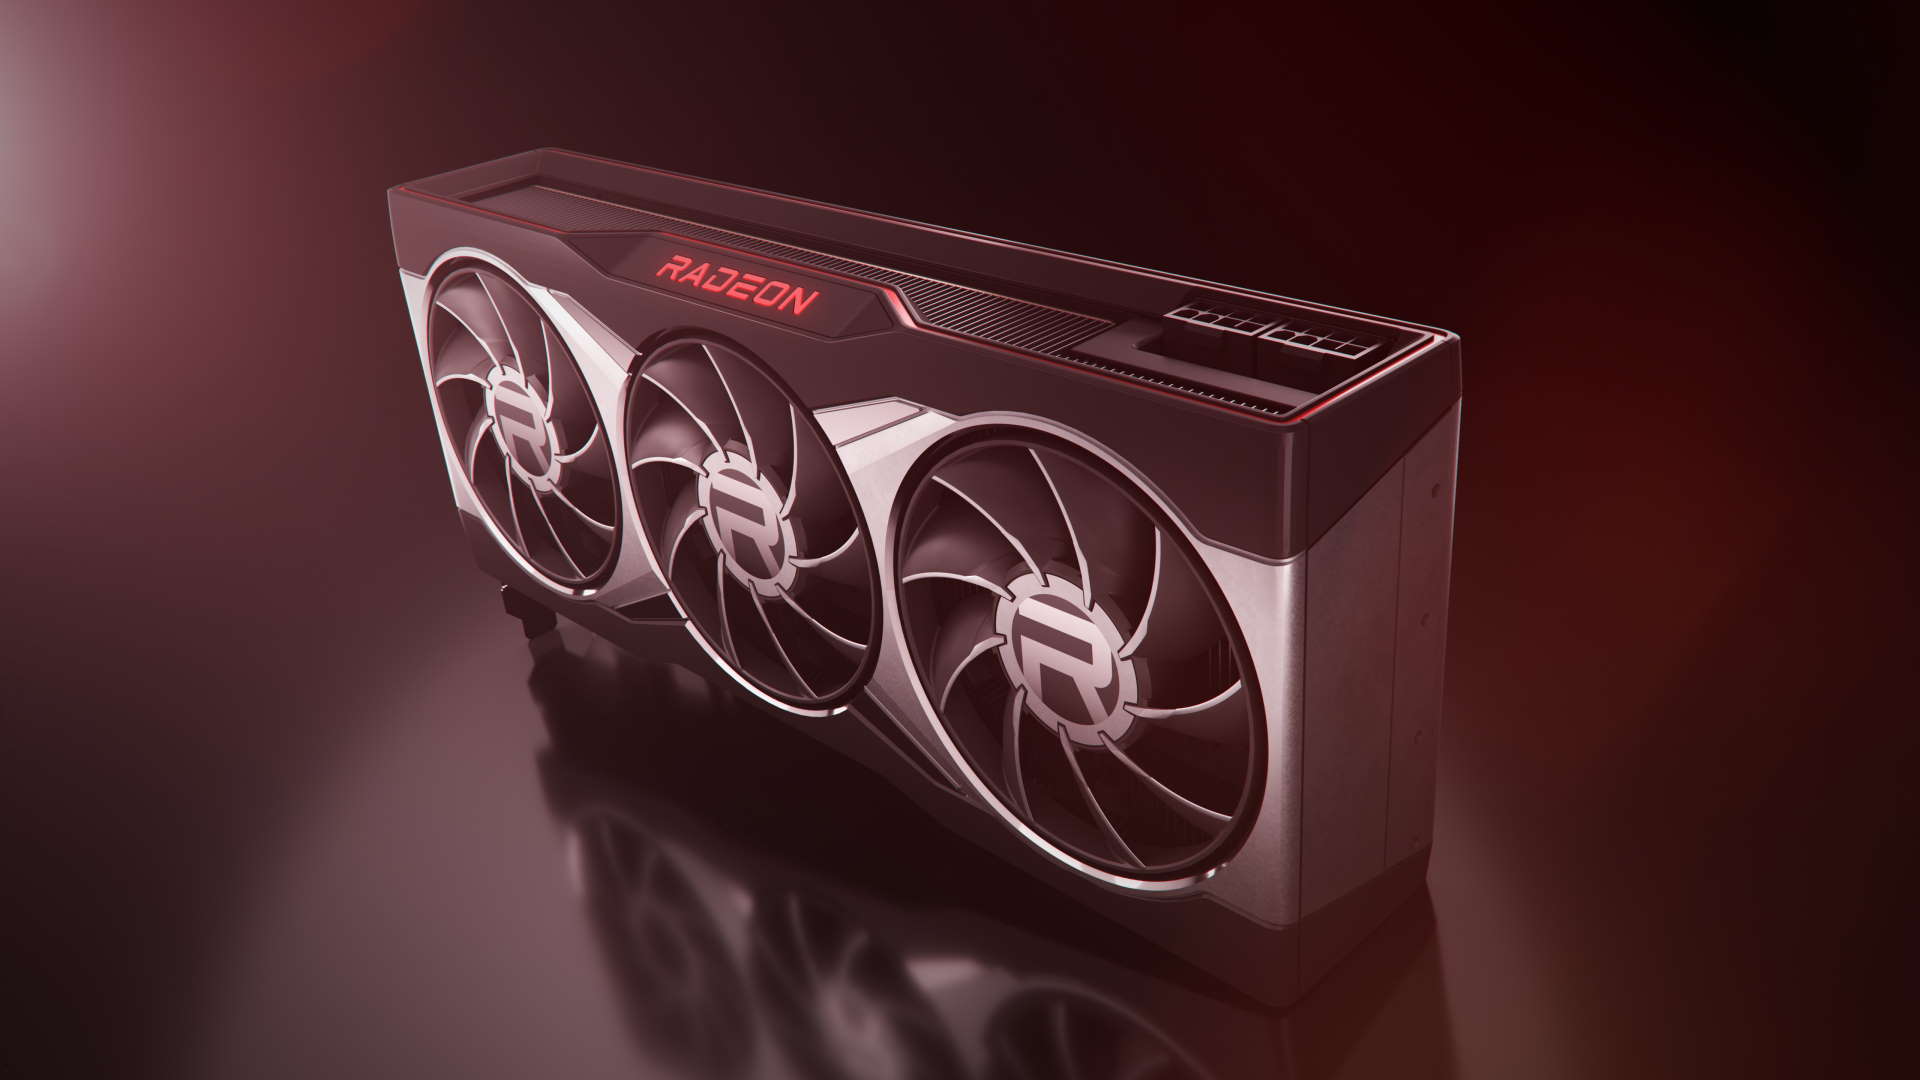  AMD RX 6000 release date, Big Navi specs, price, and performance 